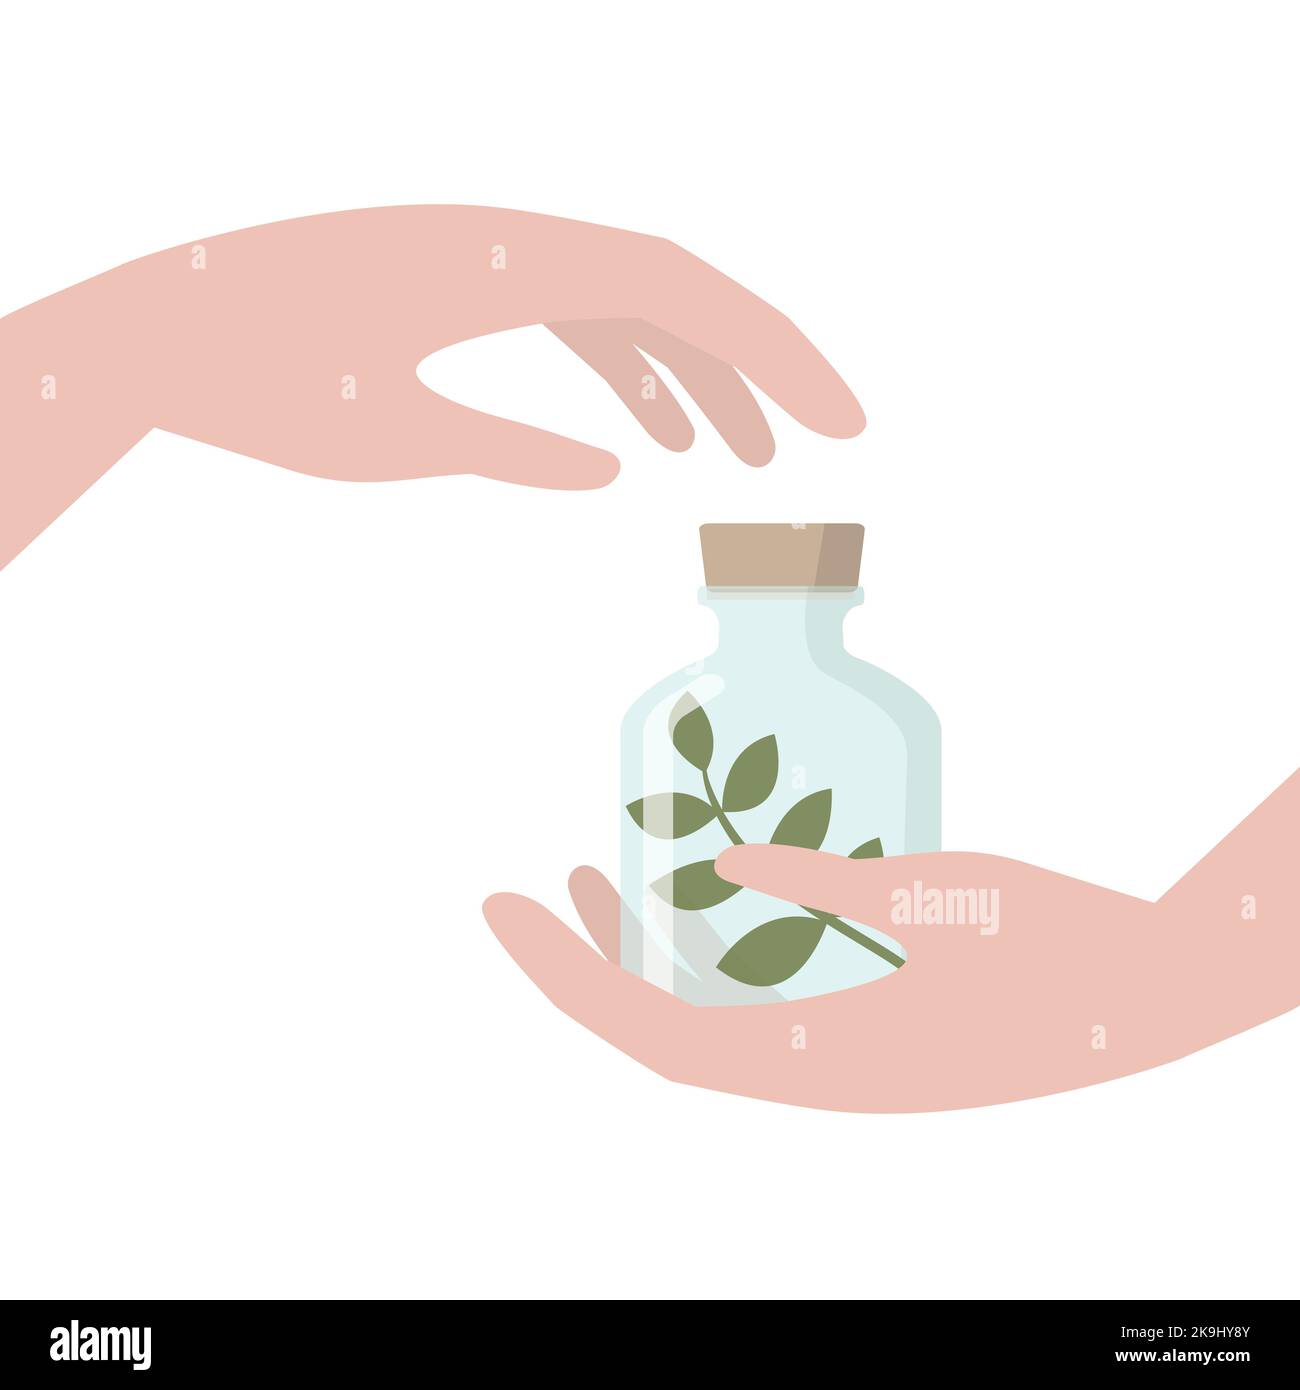 Plant in a jar. Hand holding a bottle of herbal remedies. Concept of alternative medicine, phytotherapy, homeopathy etc. Stock Vector